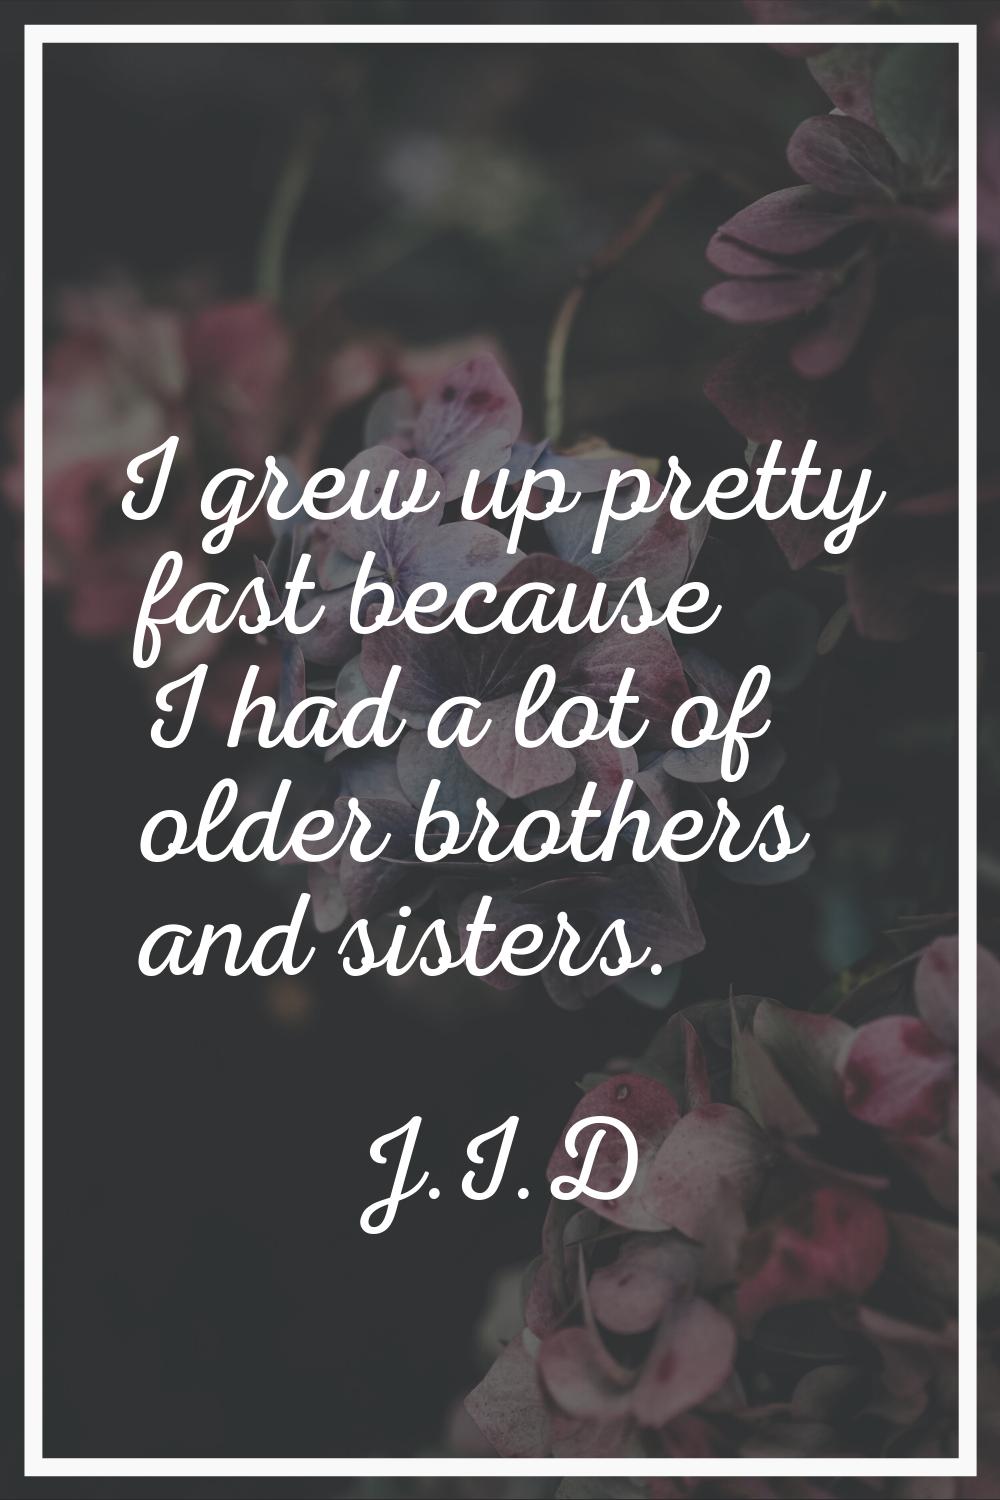 I grew up pretty fast because I had a lot of older brothers and sisters.